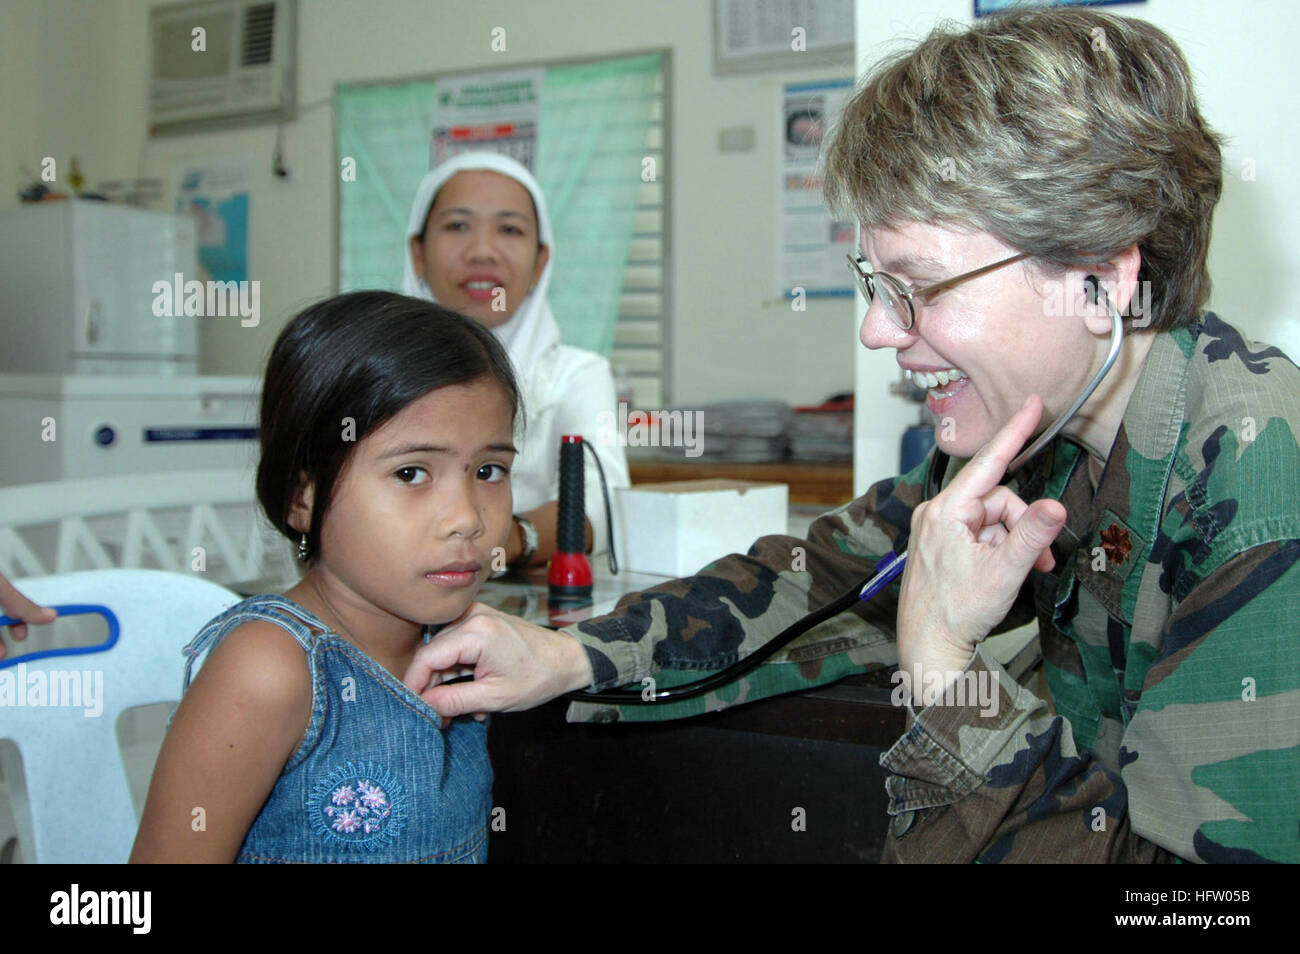 060613-N-3532C-034 Tawi Tawi, Philippines (June 13, 2006) -Air Force Maj. Valerie Clegg, a pediatrician with the Medical Treatment Facility aboard the U.S. Military Sealift Command (MSC) Hospital Ship USNS Mercy (T-AH 19), examines a young girl at Datu Halun Sakilan Memorial Hospital while the ship visits the city on a scheduled humanitarian mission. As part of its five-month humanitarian assistance deployment to South and Southeast Asia, and the Pacific Islands, the crew aboard Mercy will spend several days delivering medical care to local residents. The crew will conduct medical operations a Stock Photo